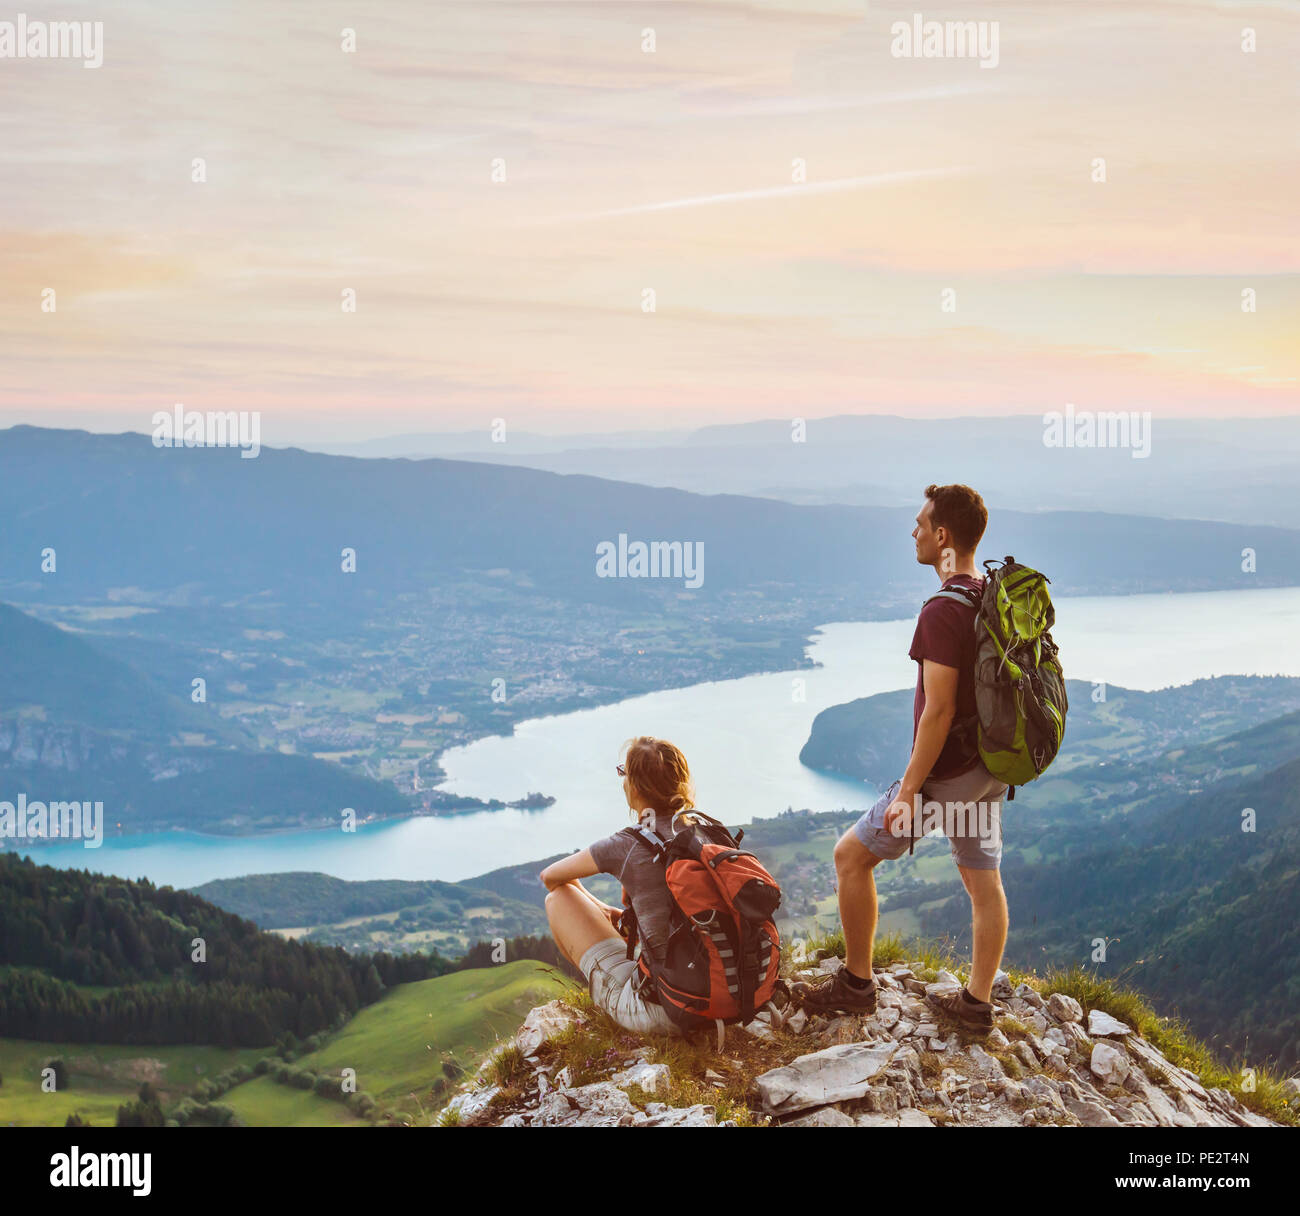 couple of hikers relaxing on top of mountain with beautiful panoramic view outdoors, two tourists backpackers during hike, adventure honeymoon Stock Photo